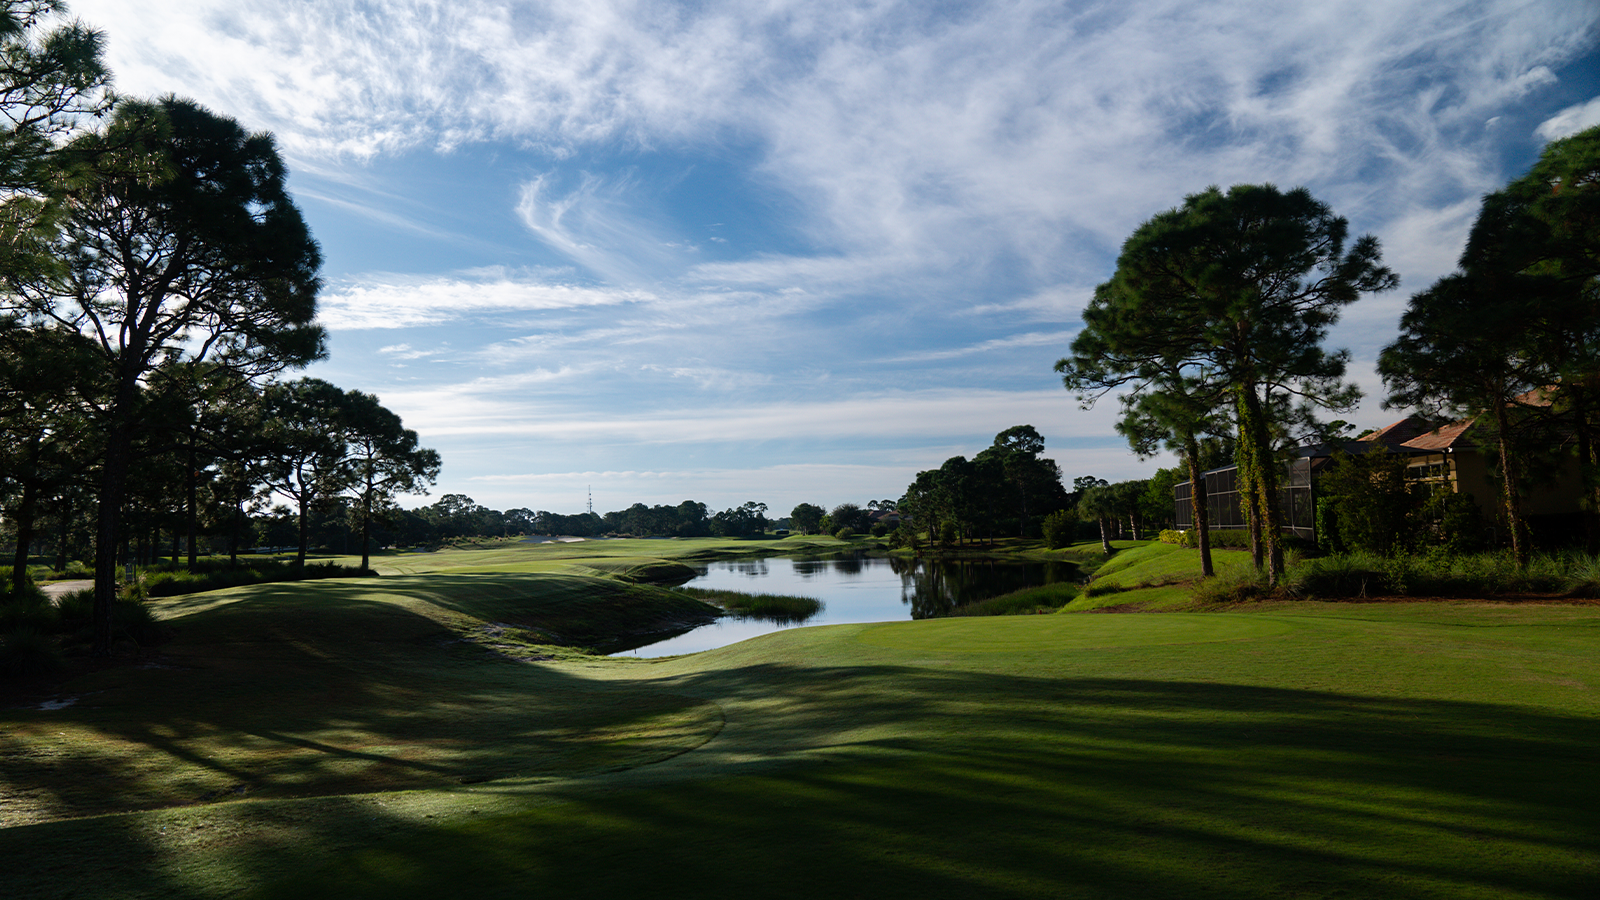 The 13th hole during the final round of the 45th National Car Rental Assistant PGA Professional Championship held at the PGA Golf Club on November 14, 2021 in Port St. Lucie, Florida. (Photo by Hailey Garrett/PGA of America)